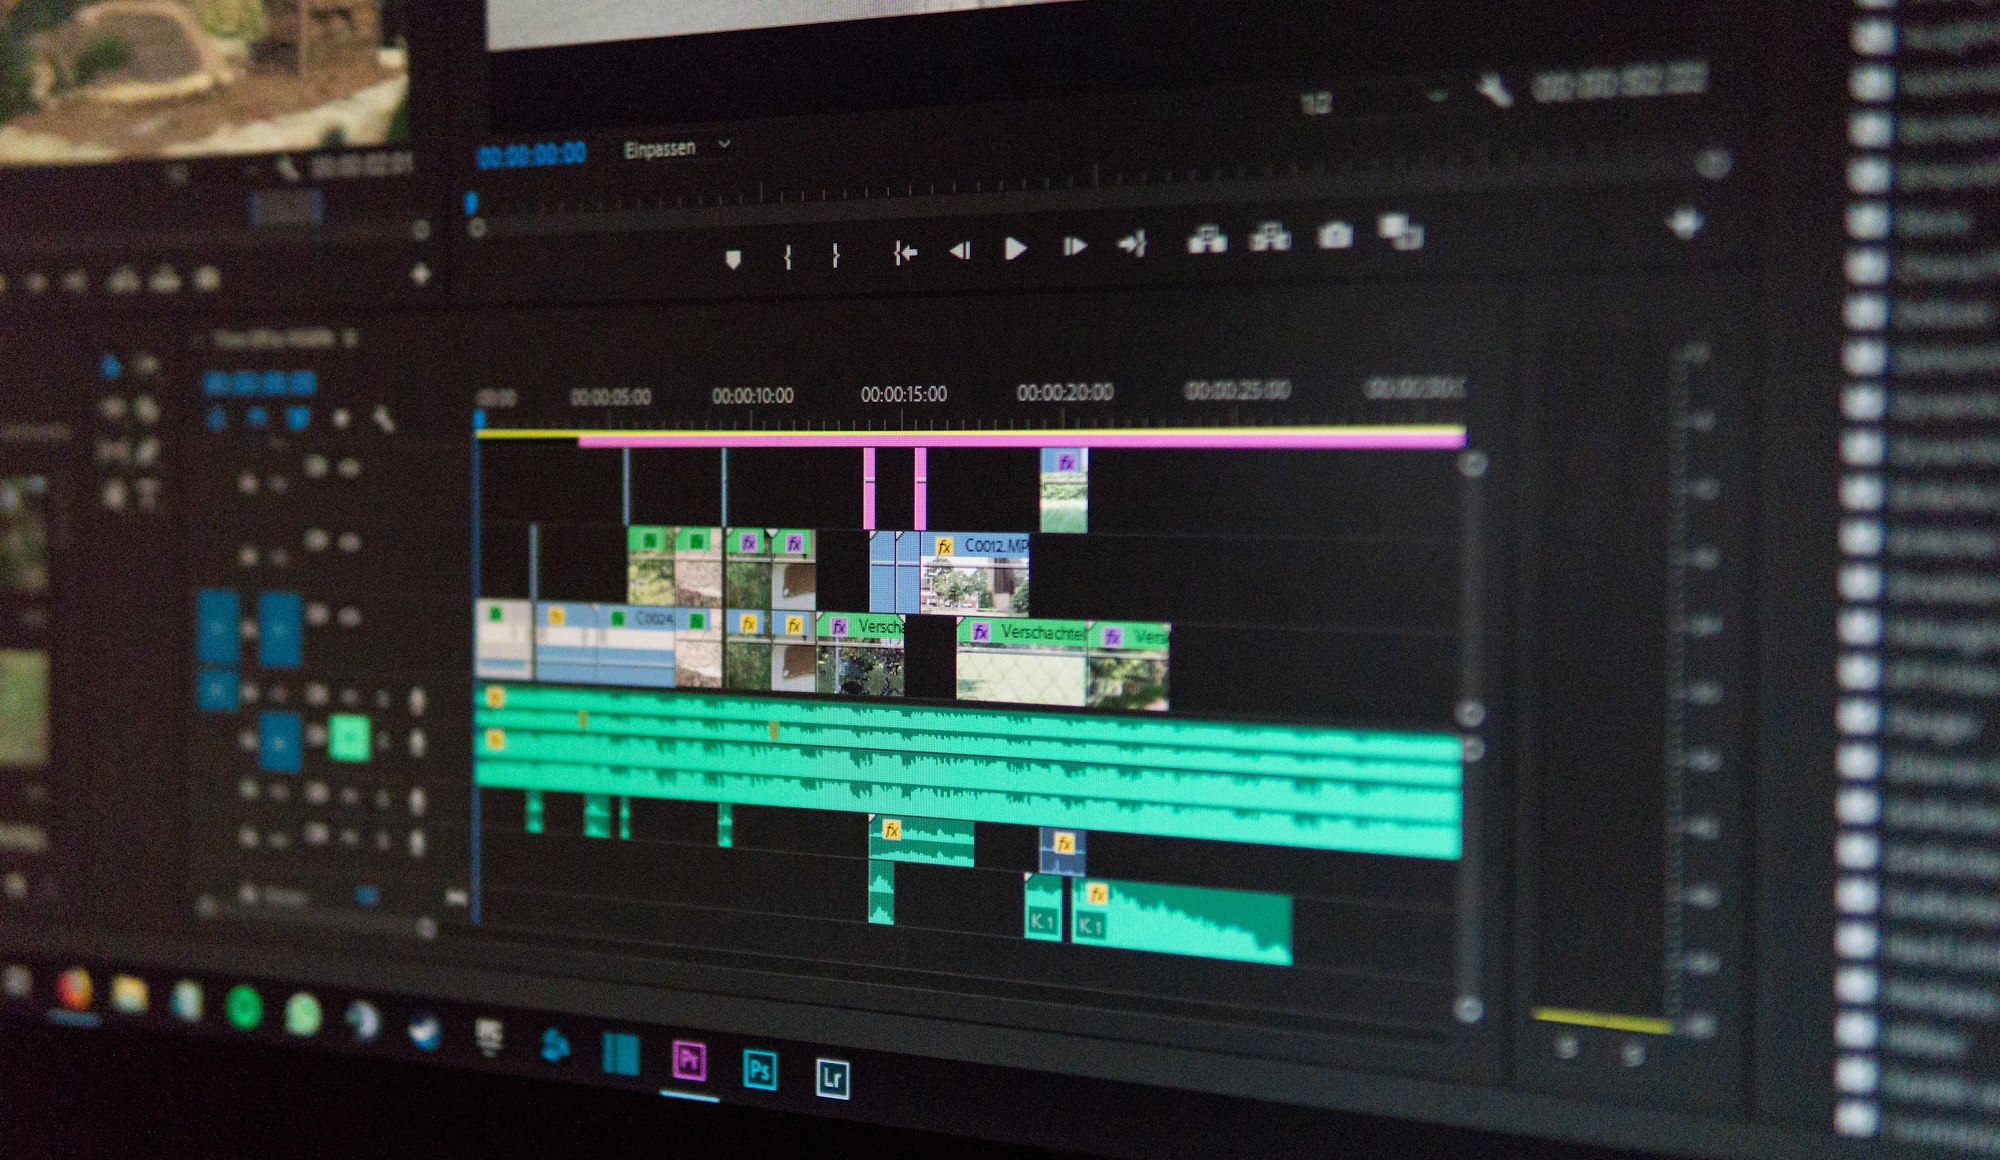 Adobe Premiere Pro Text-Based Editing: Issue with Playhead Jumping Around